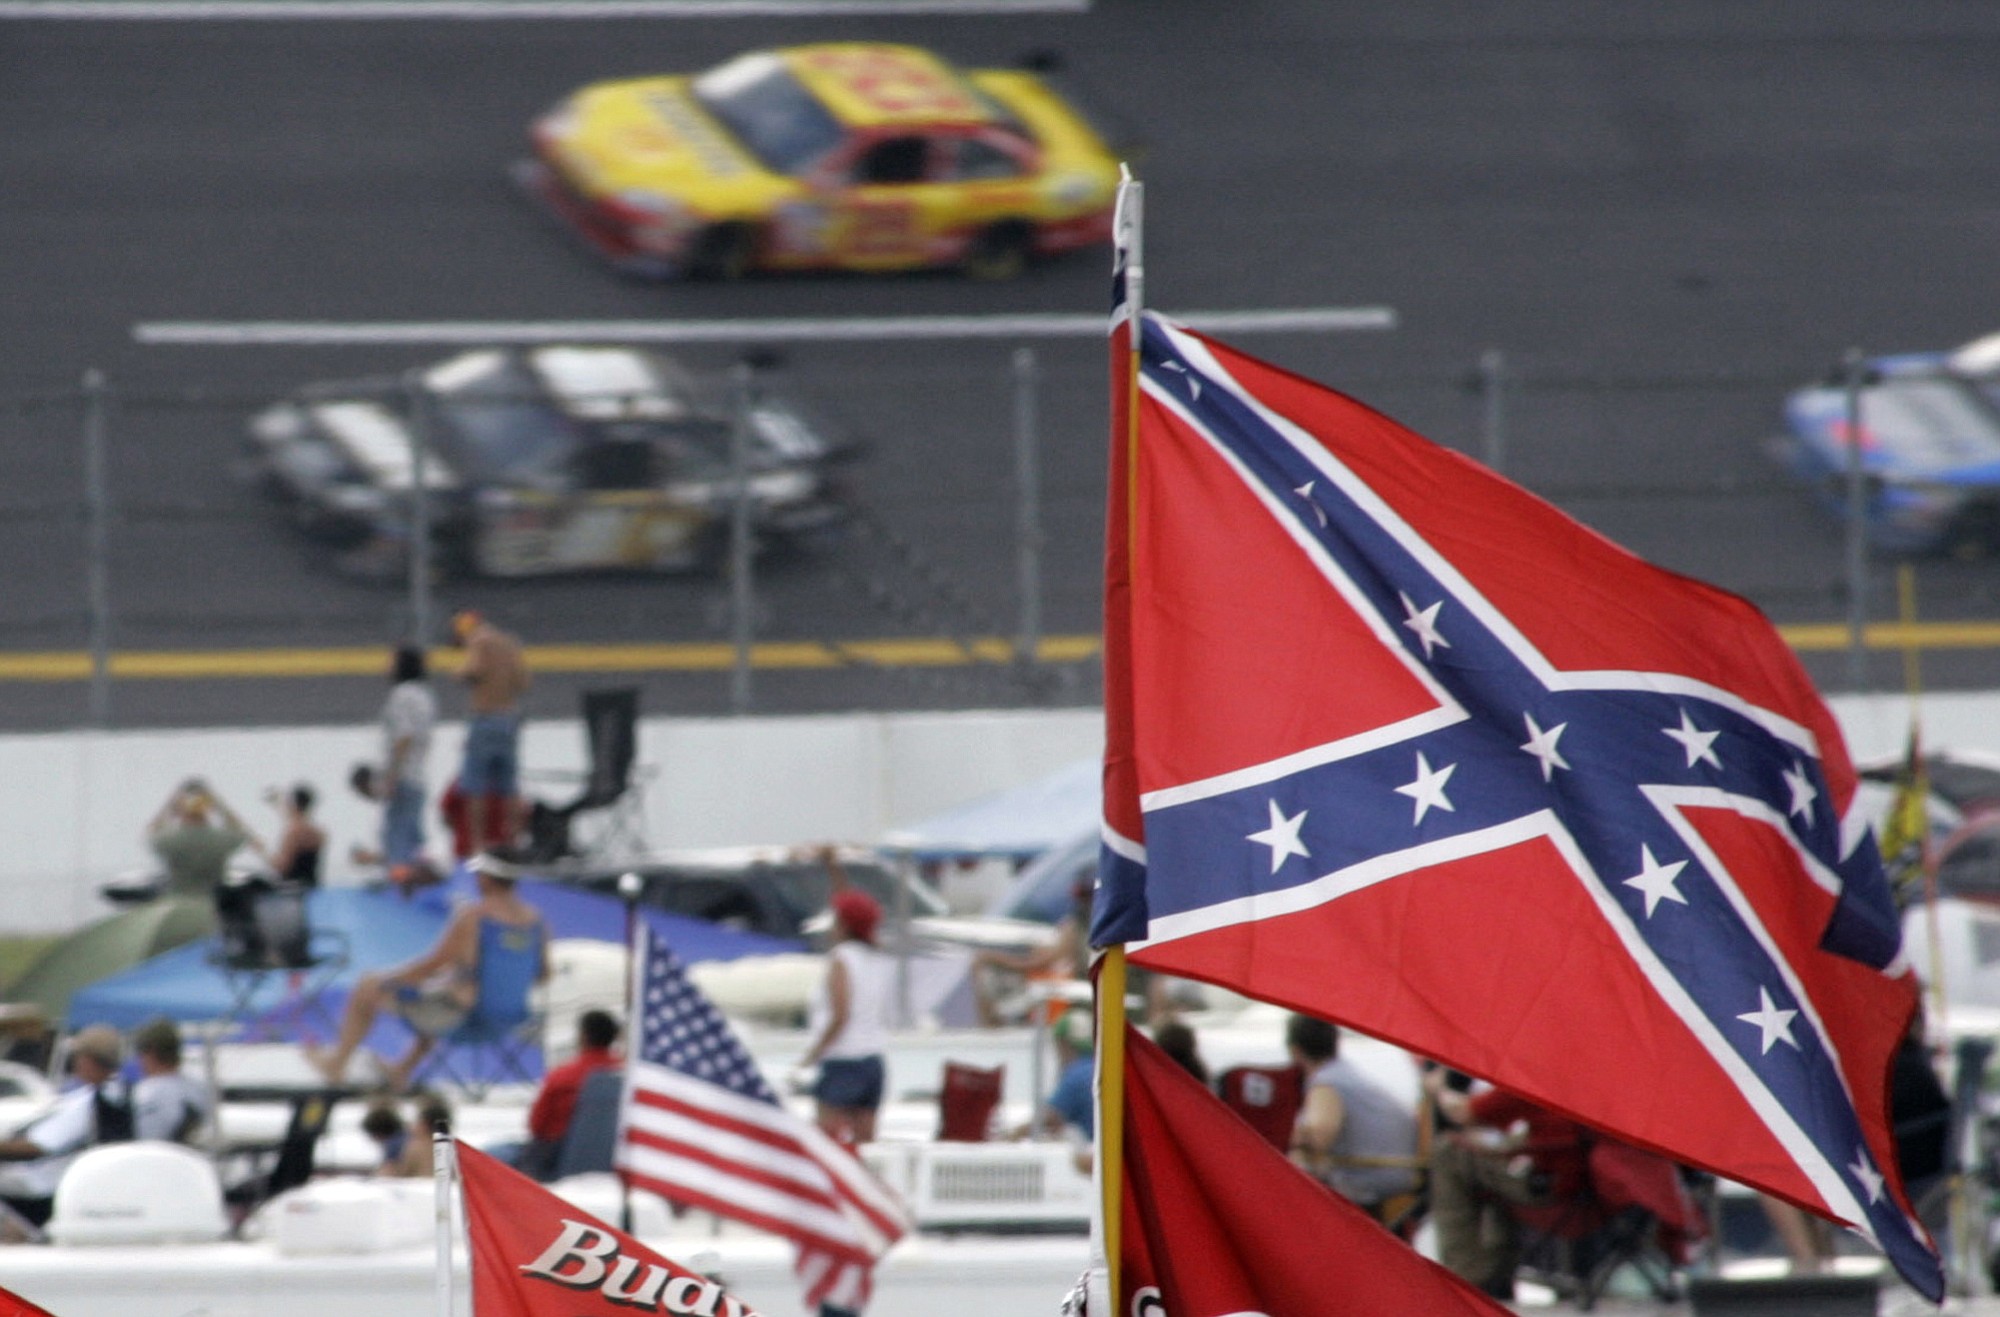 A Confederate flag flies in the infield as cars come out of turn one during a NASCAR auto race at Talladega Superspeedway in Talladega, Ala. Though NASCAR bars the use of the flag in any official capacity, many fans fly the flag at their races.